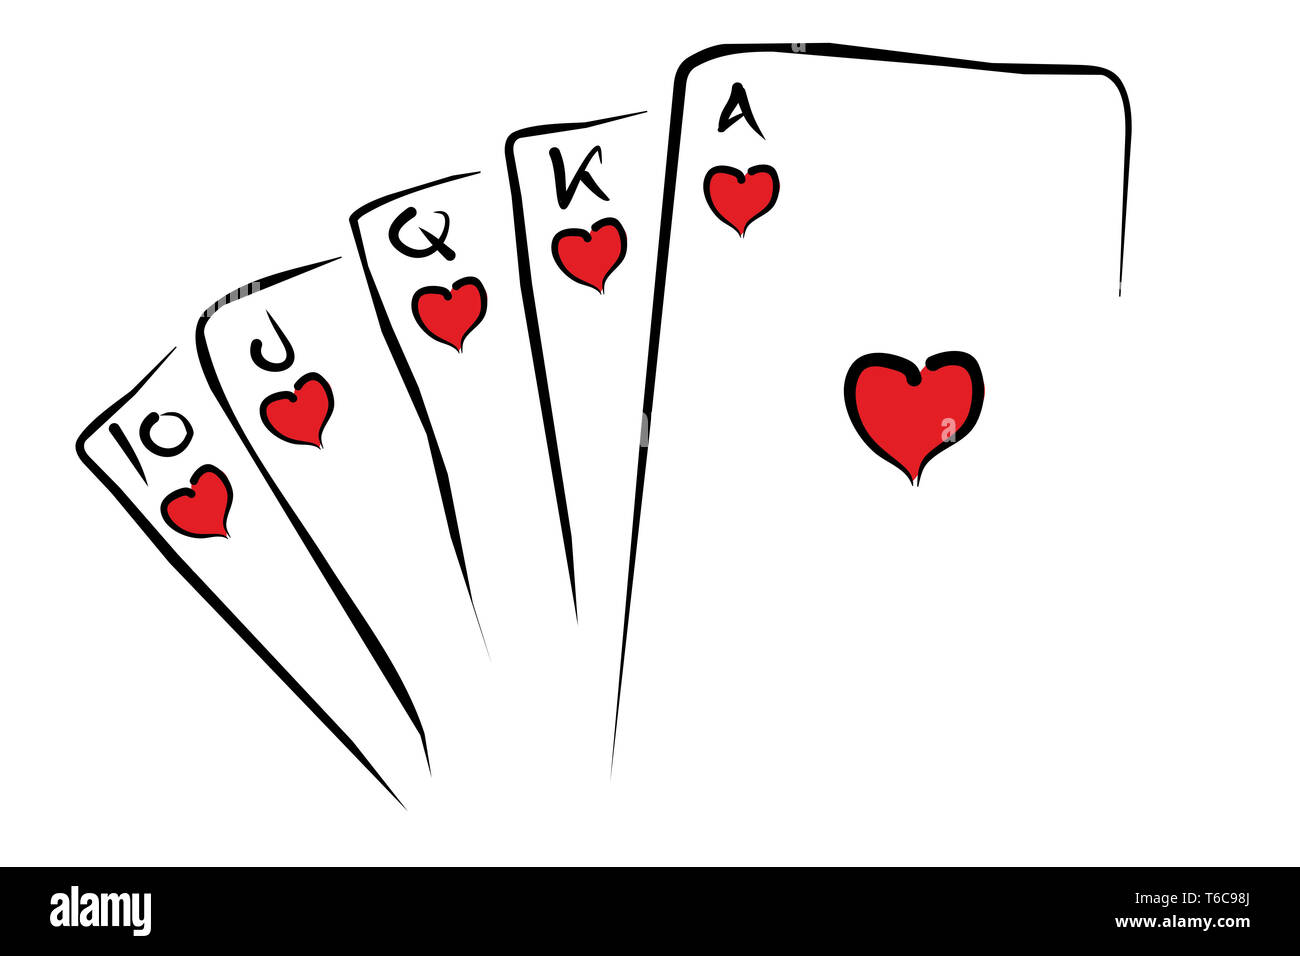 What is a straight flush in texas holdem